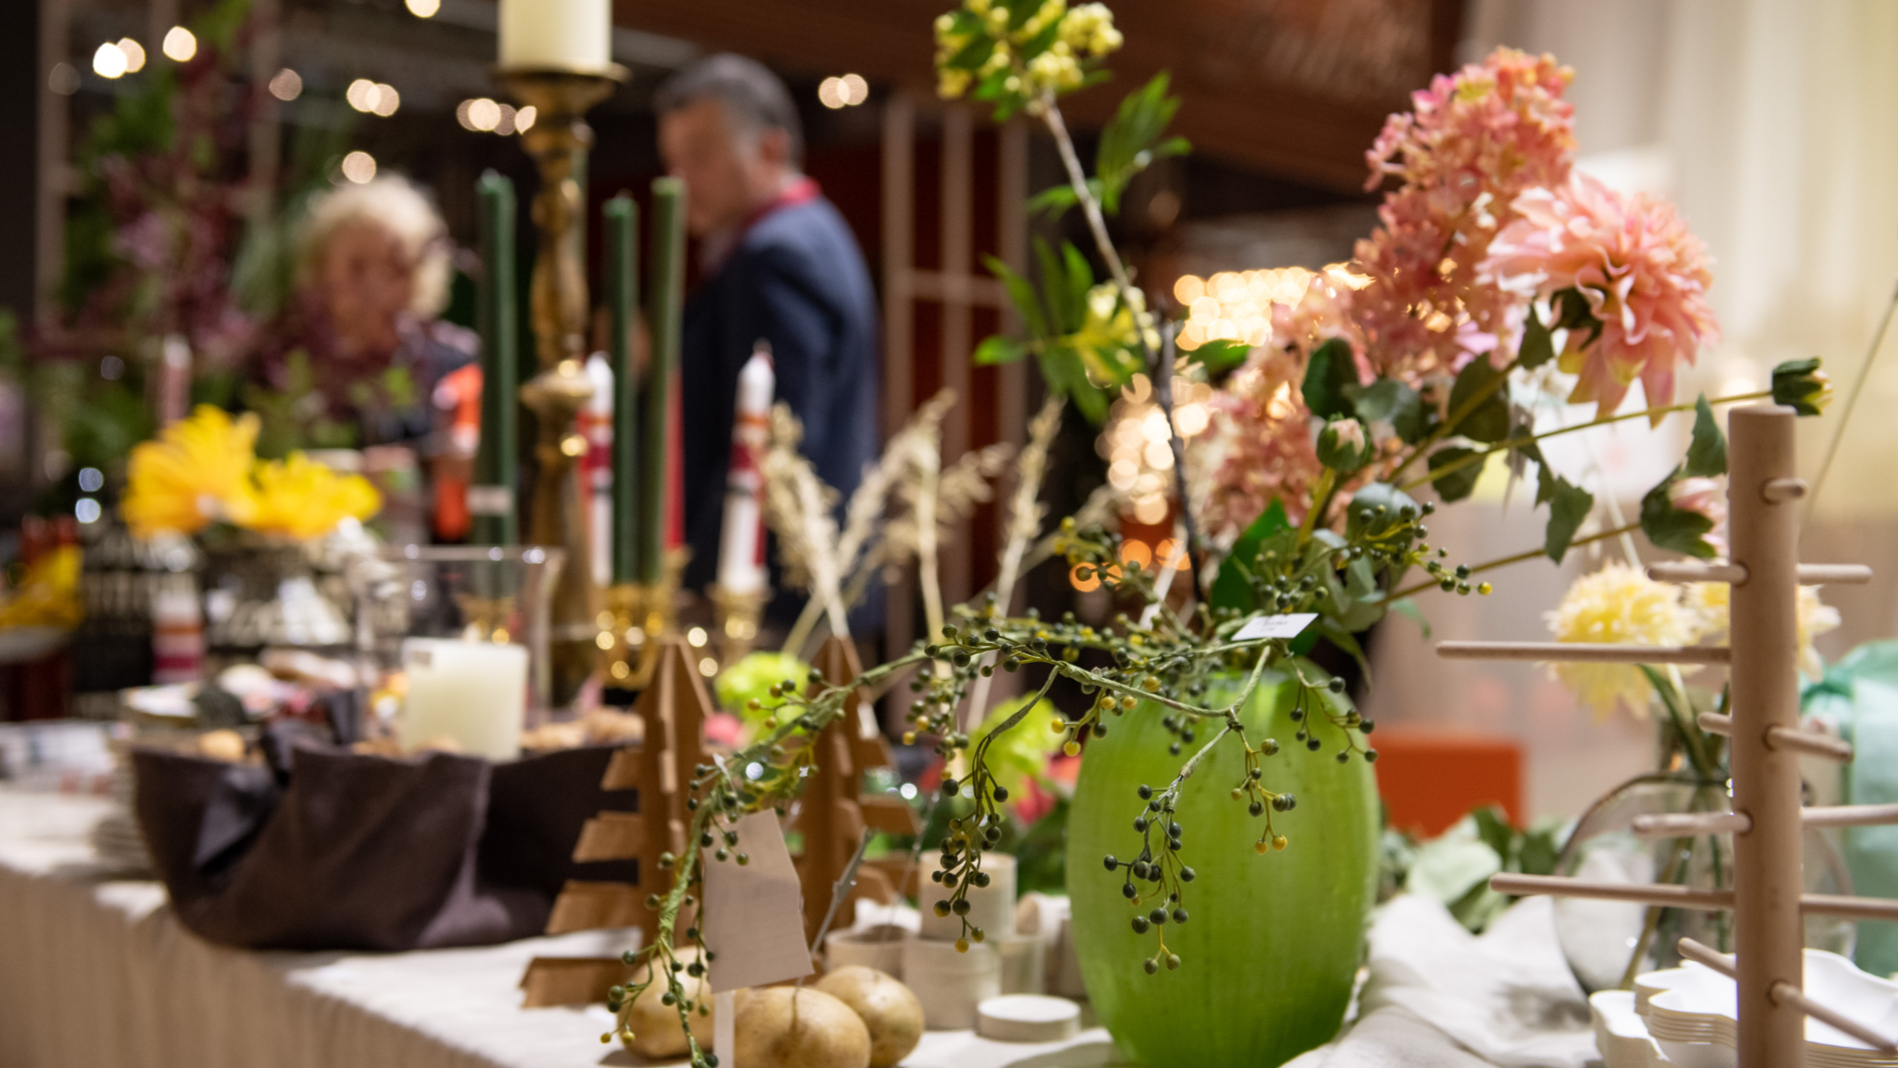 Floristry, vases or candles in May green and lime go very well with late summer or autumn decorations - says trend expert Claudia Herke. Photo: Messe Frankfurt/Pietro Sutera